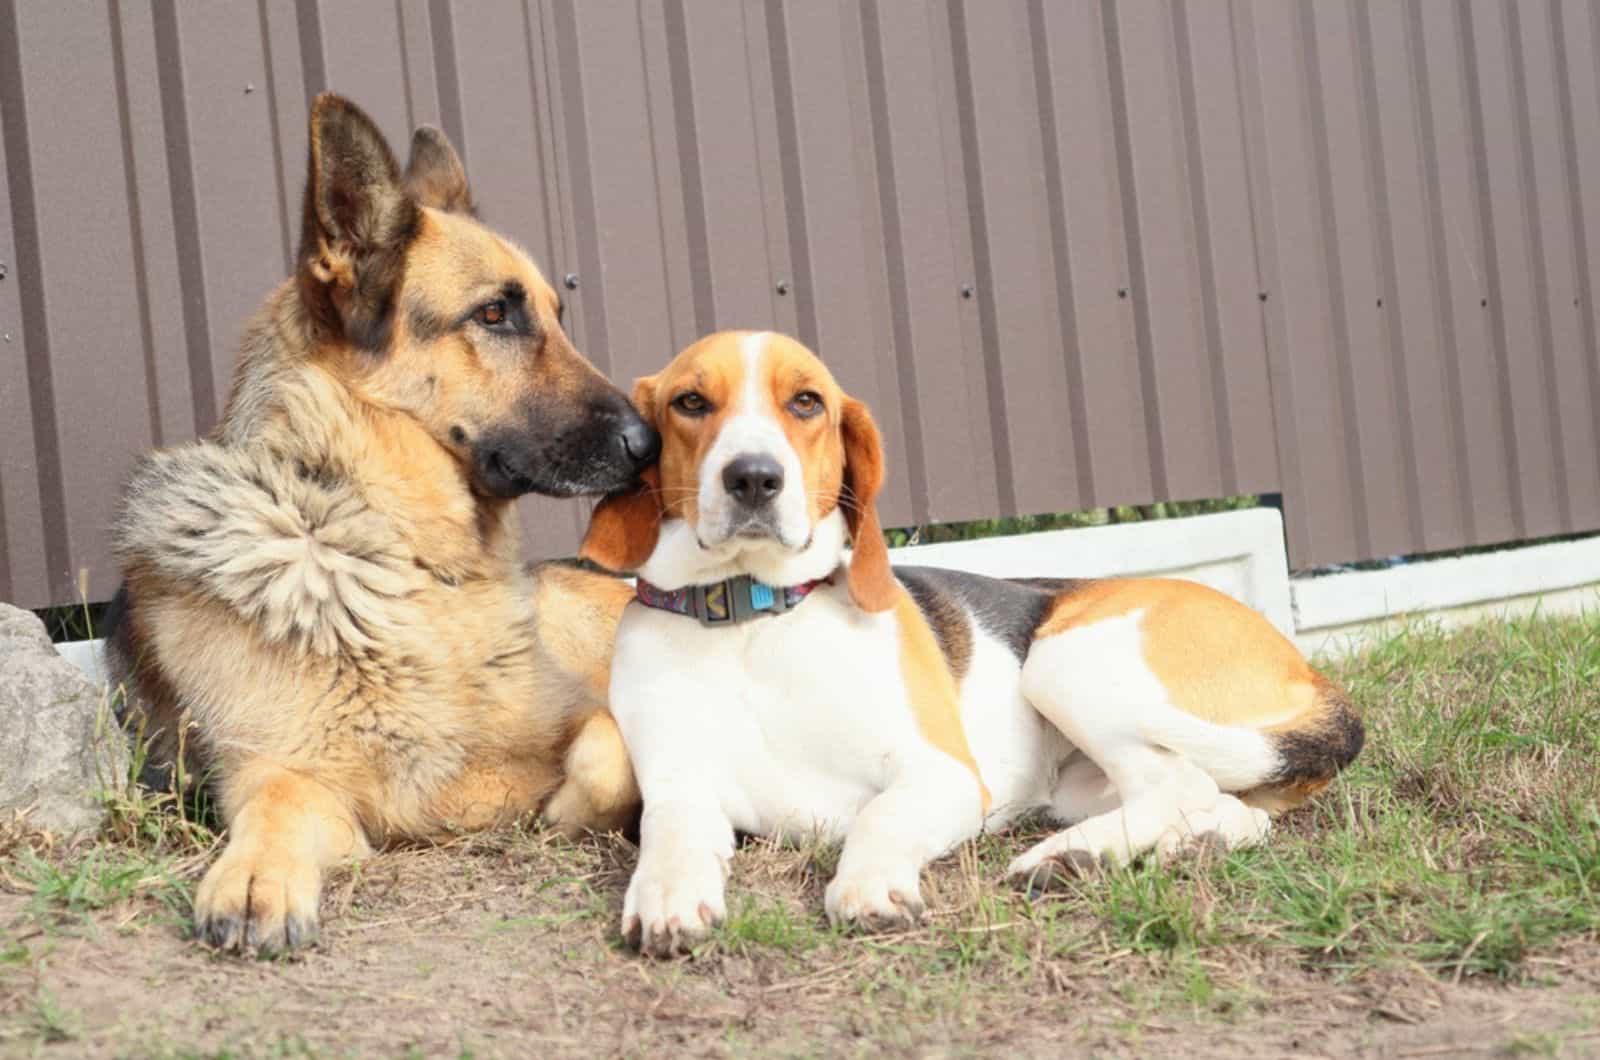 german shepherd and beagle lying outdoors together